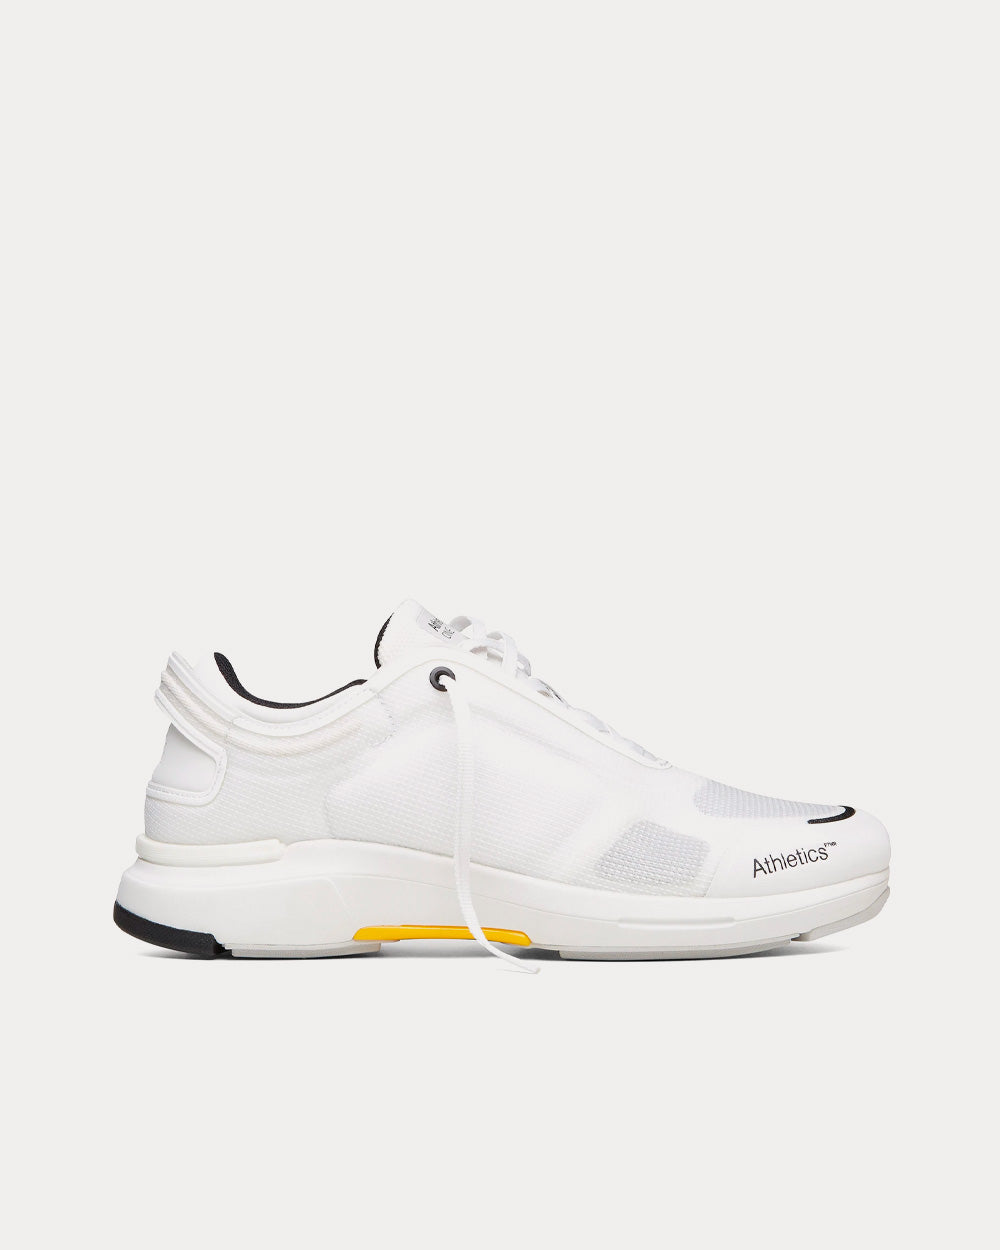 Athletics FTWR - ONE White / White / Cadmium Low Top Sneakers